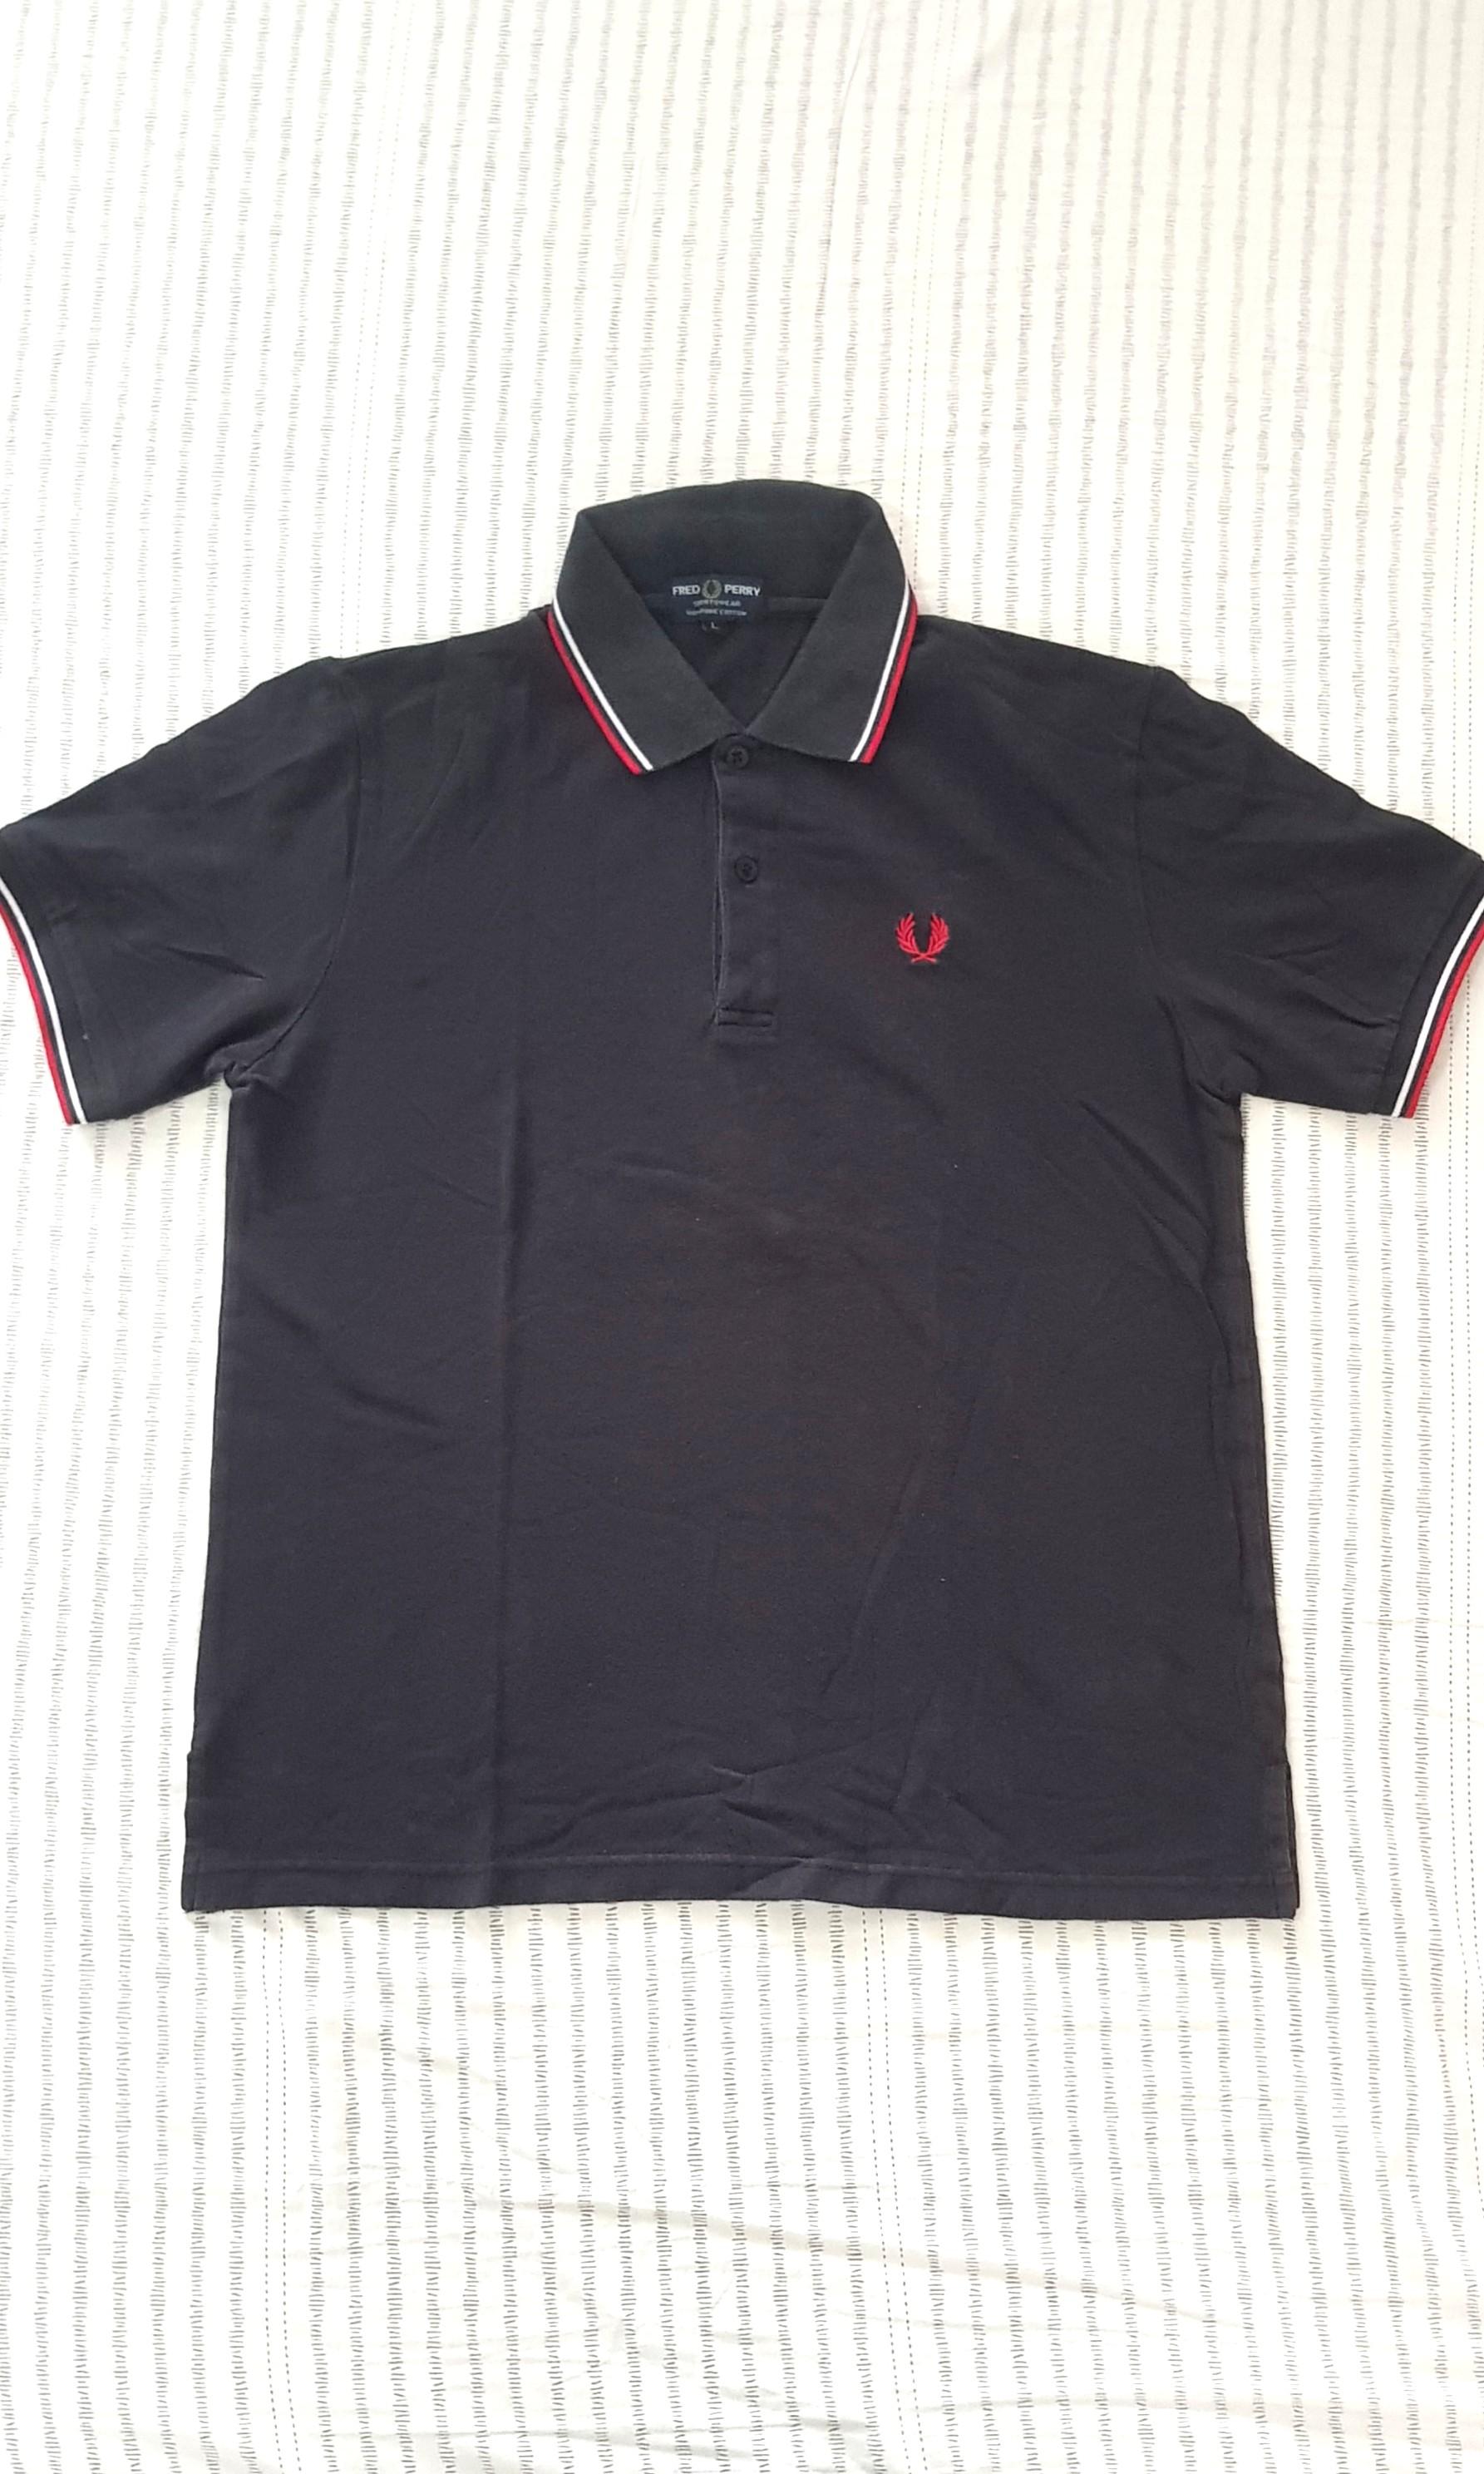 Fred Sperry polo shirt (black) (Men's 